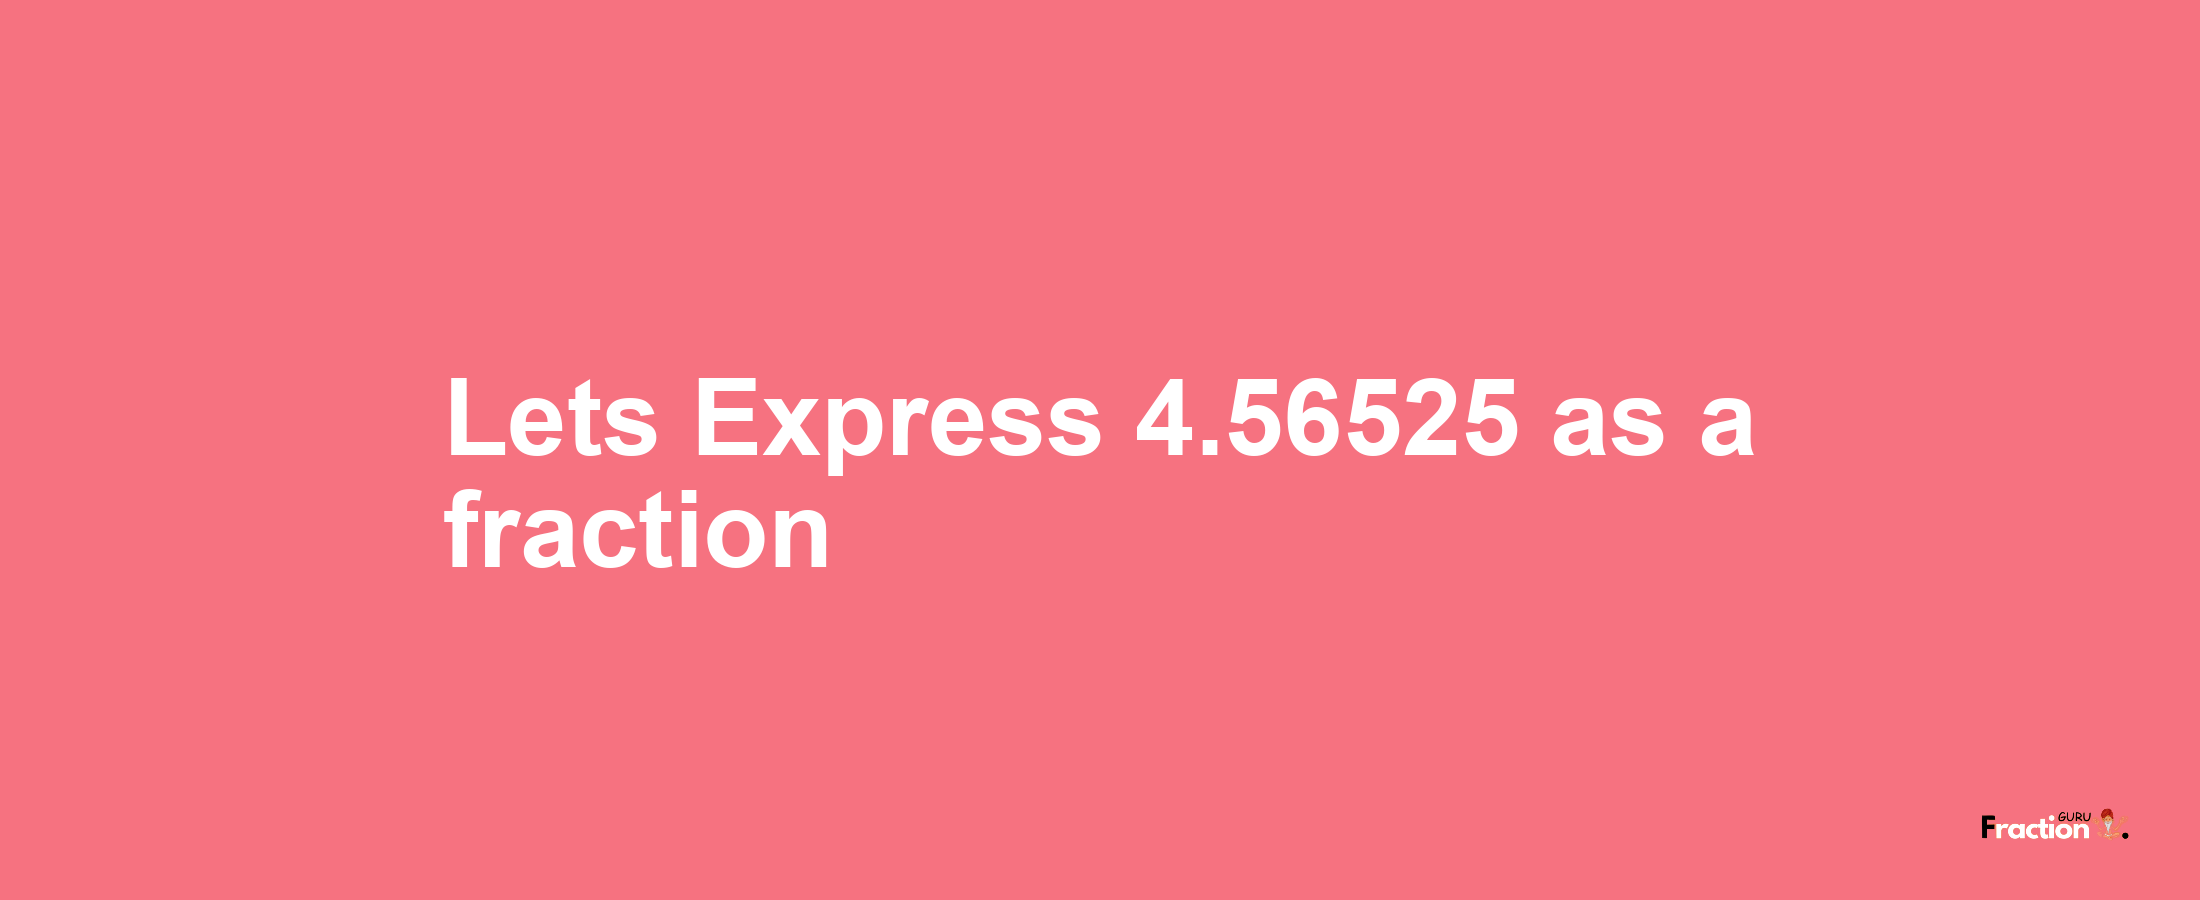 Lets Express 4.56525 as afraction